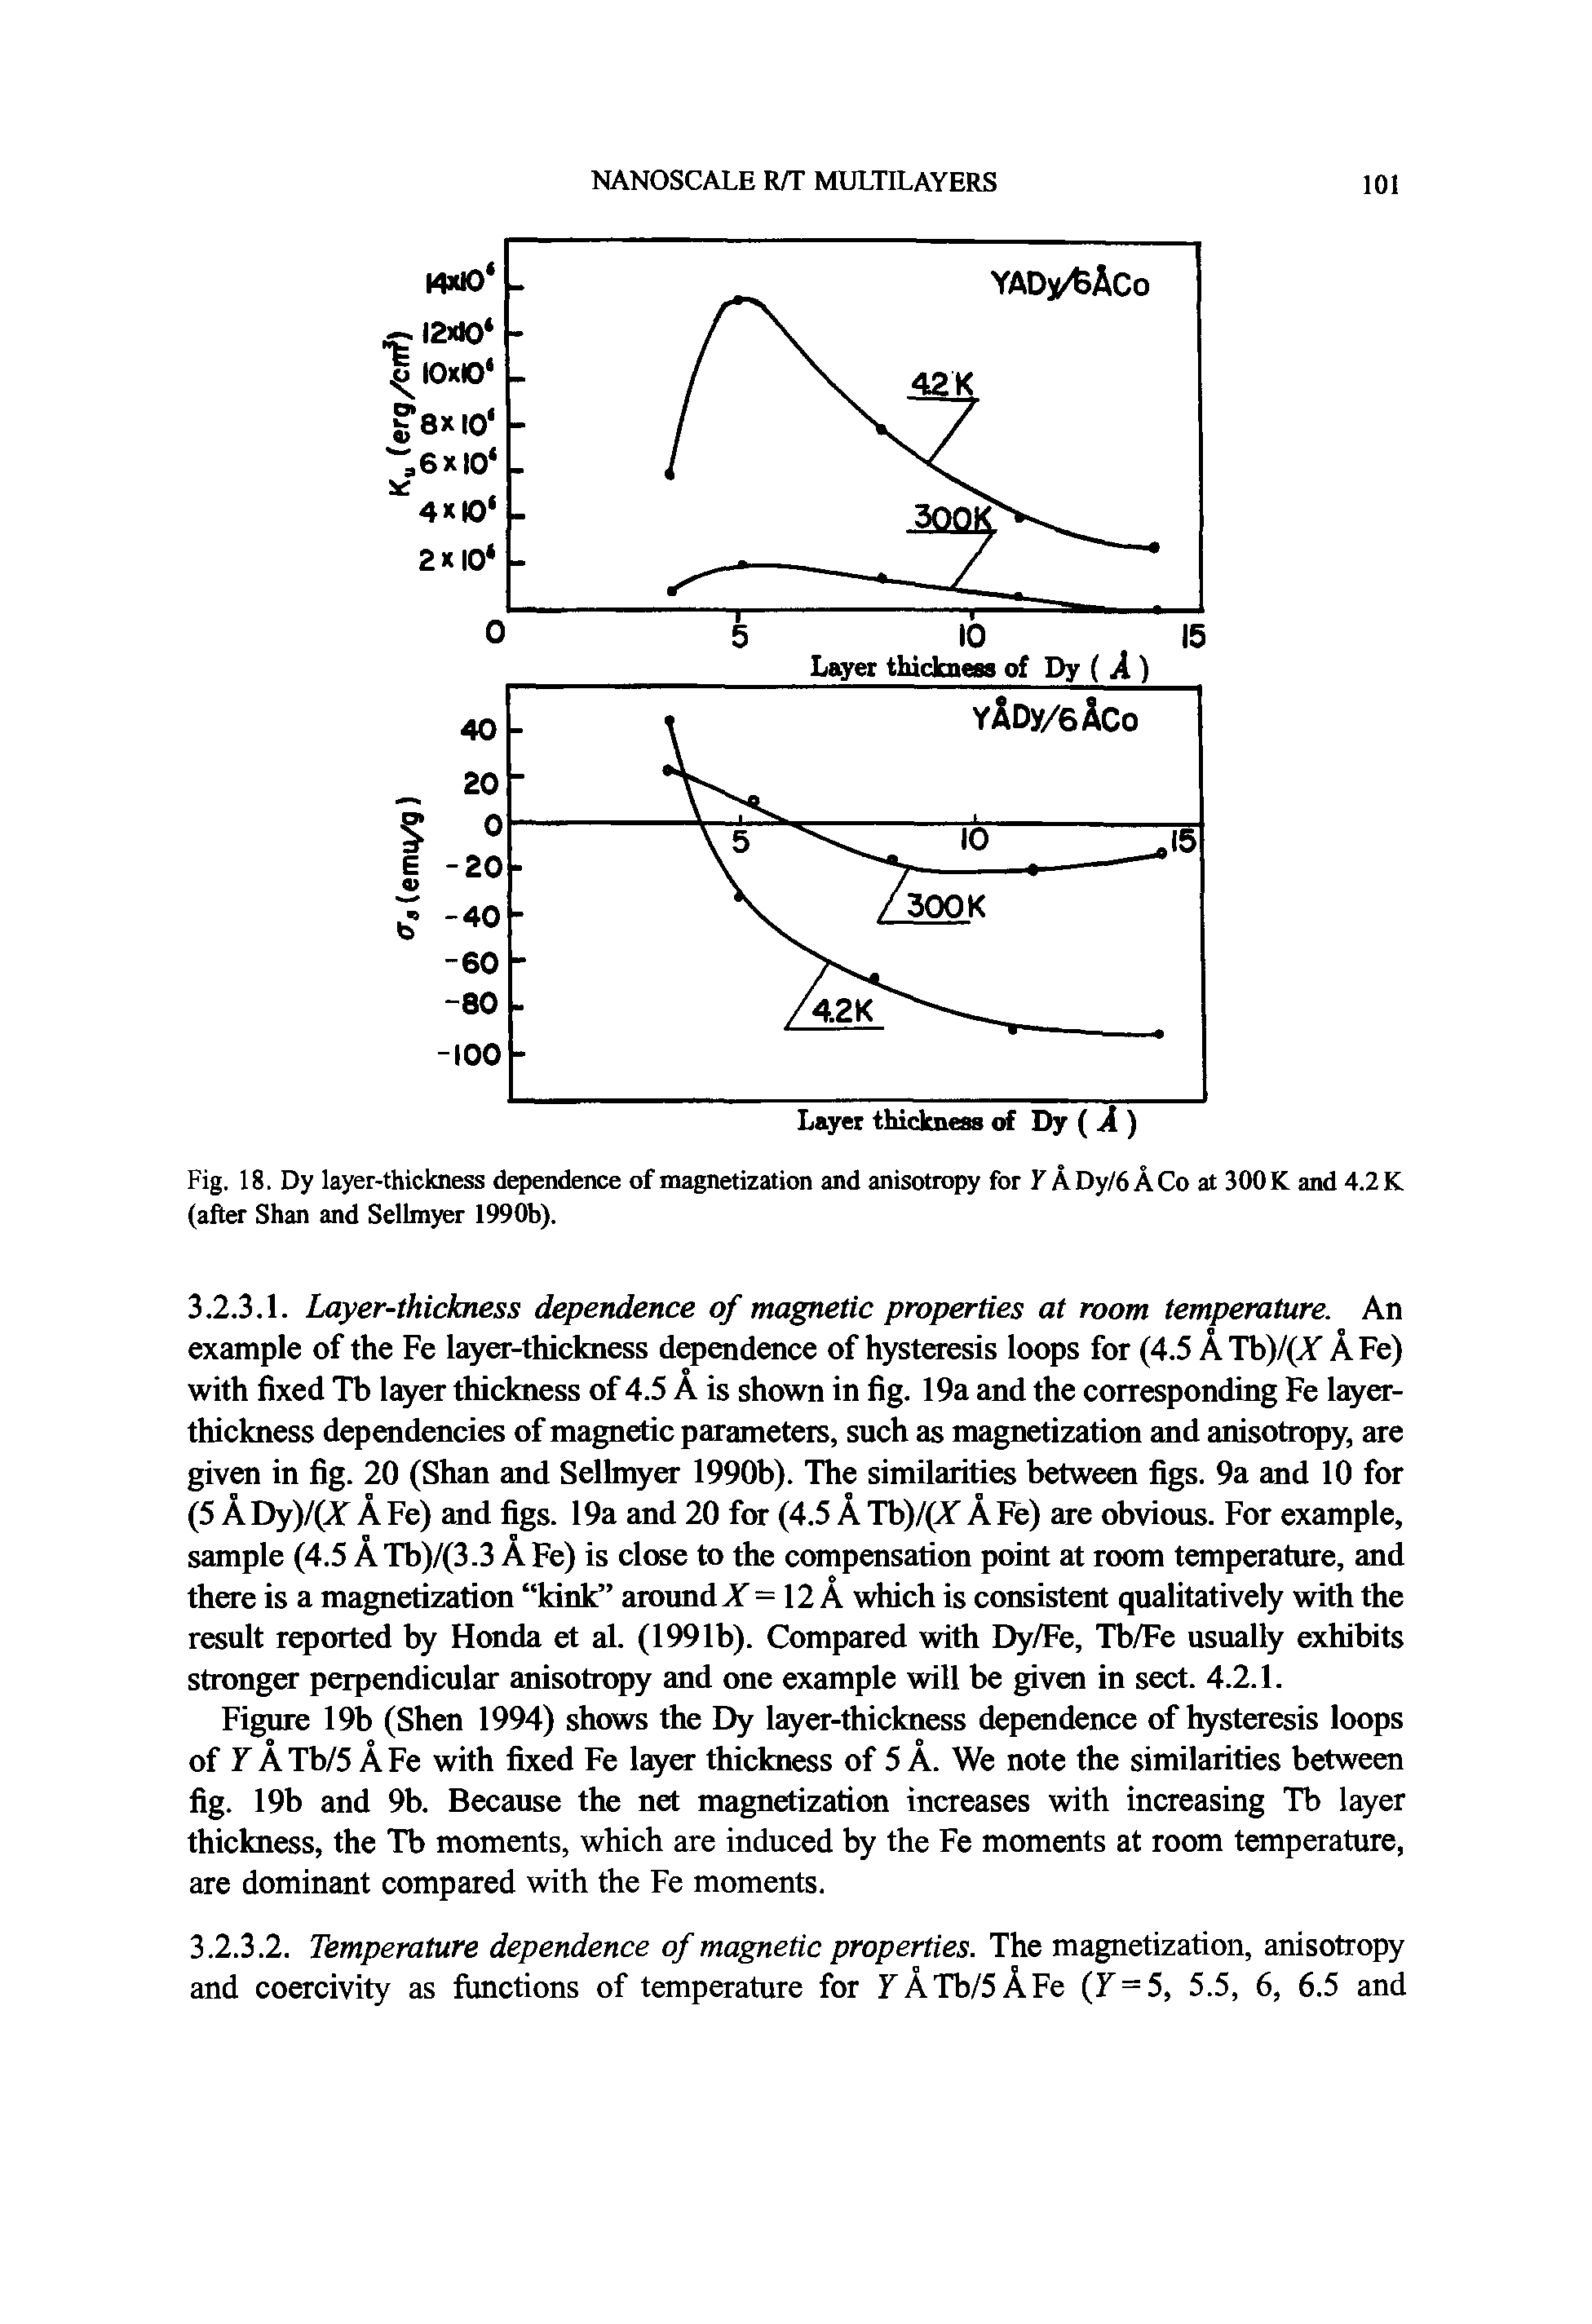 Fig. 18. Dy layer-thickness dependence of magnetization and anisotropy for K AOy/6 ACo at 300 K and 4.2 K (after Shan and Sellmyer 1990b).